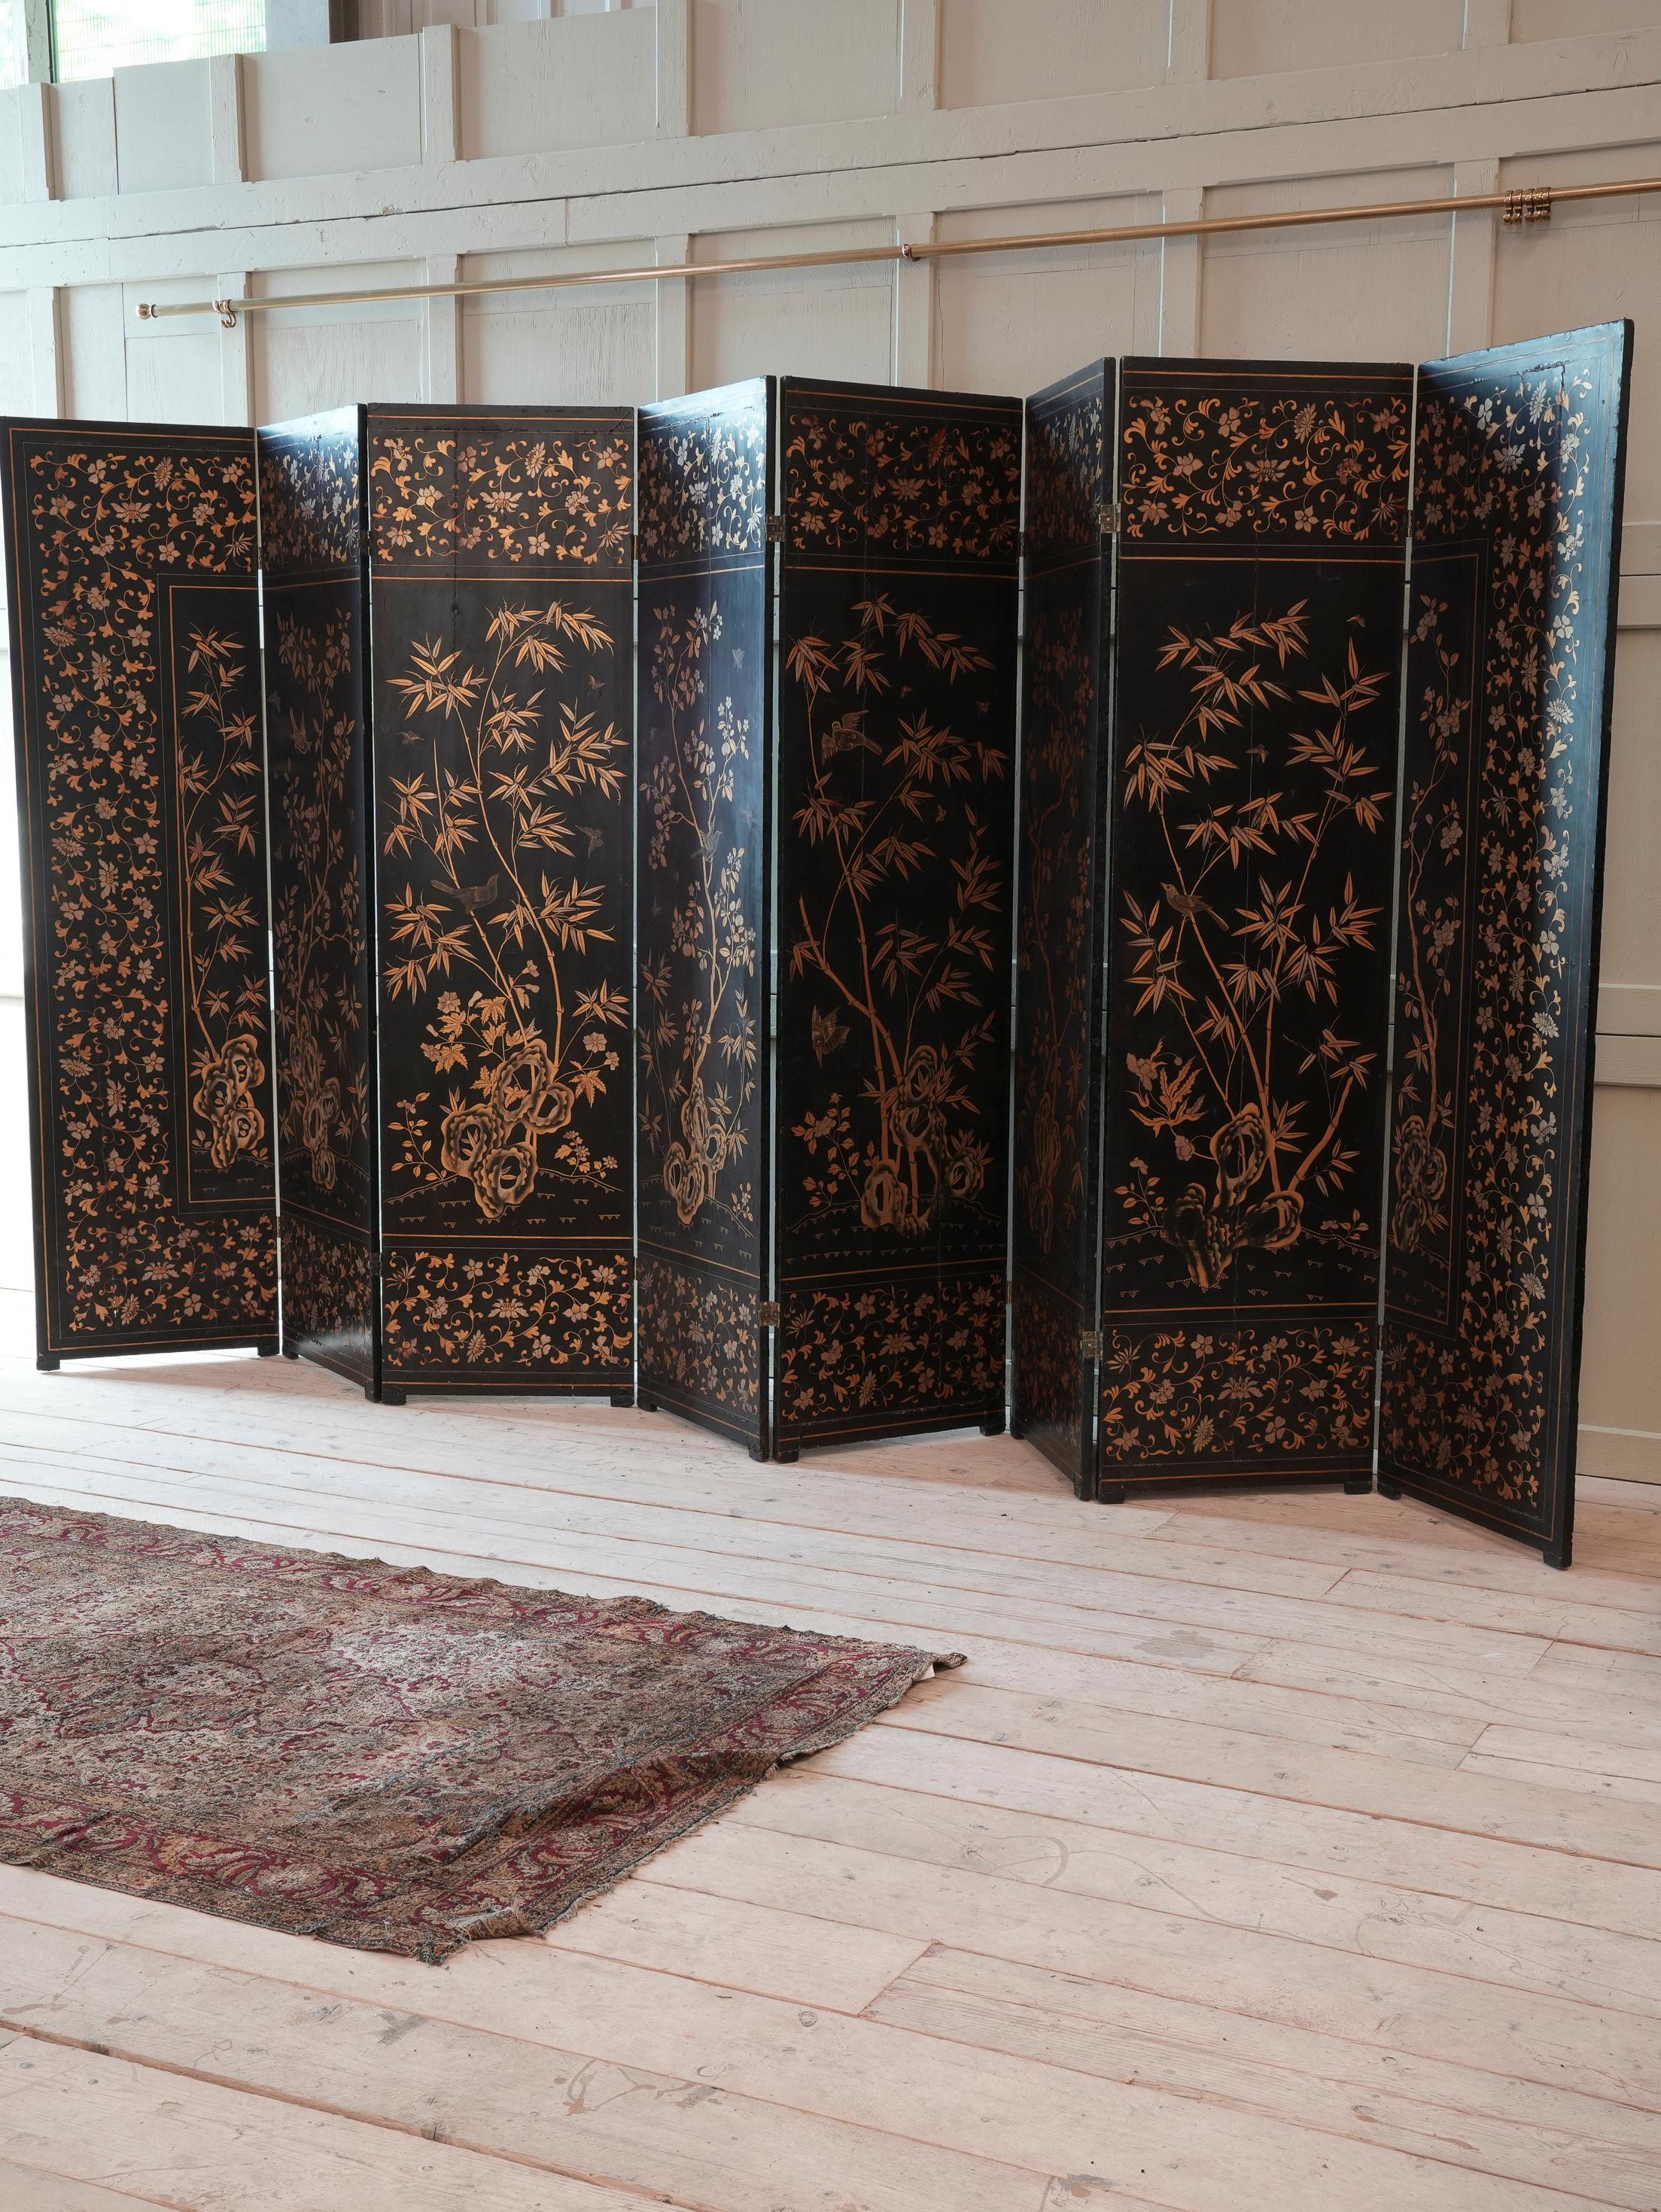 English Early 19th Century Chinese Export Eight-Fold Lacquer Screen For Sale